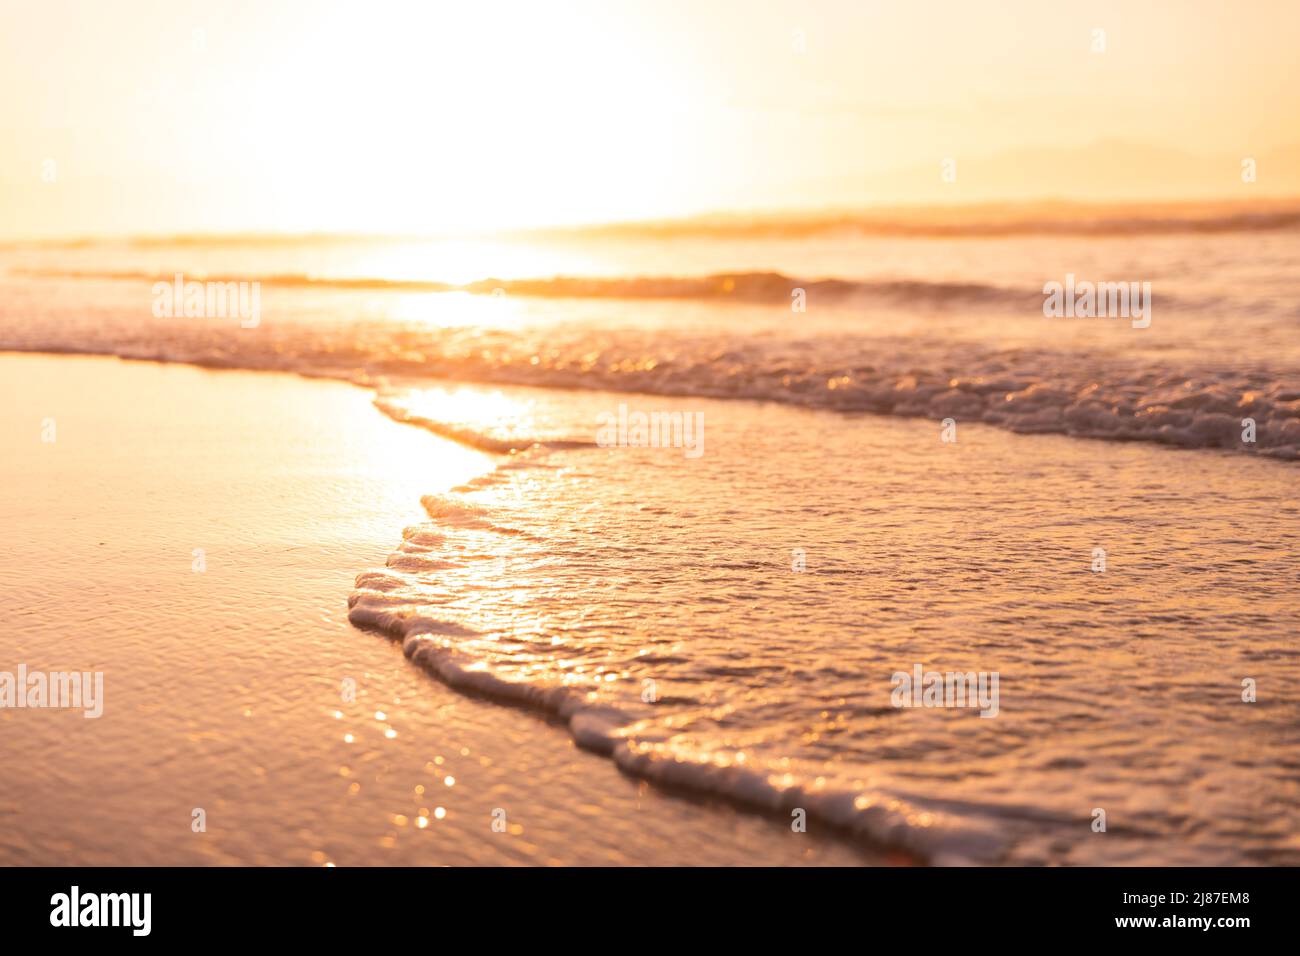 Scenic view of waves splashing at shore and bright sun reflecting on seascape against sky at sunset Stock Photo